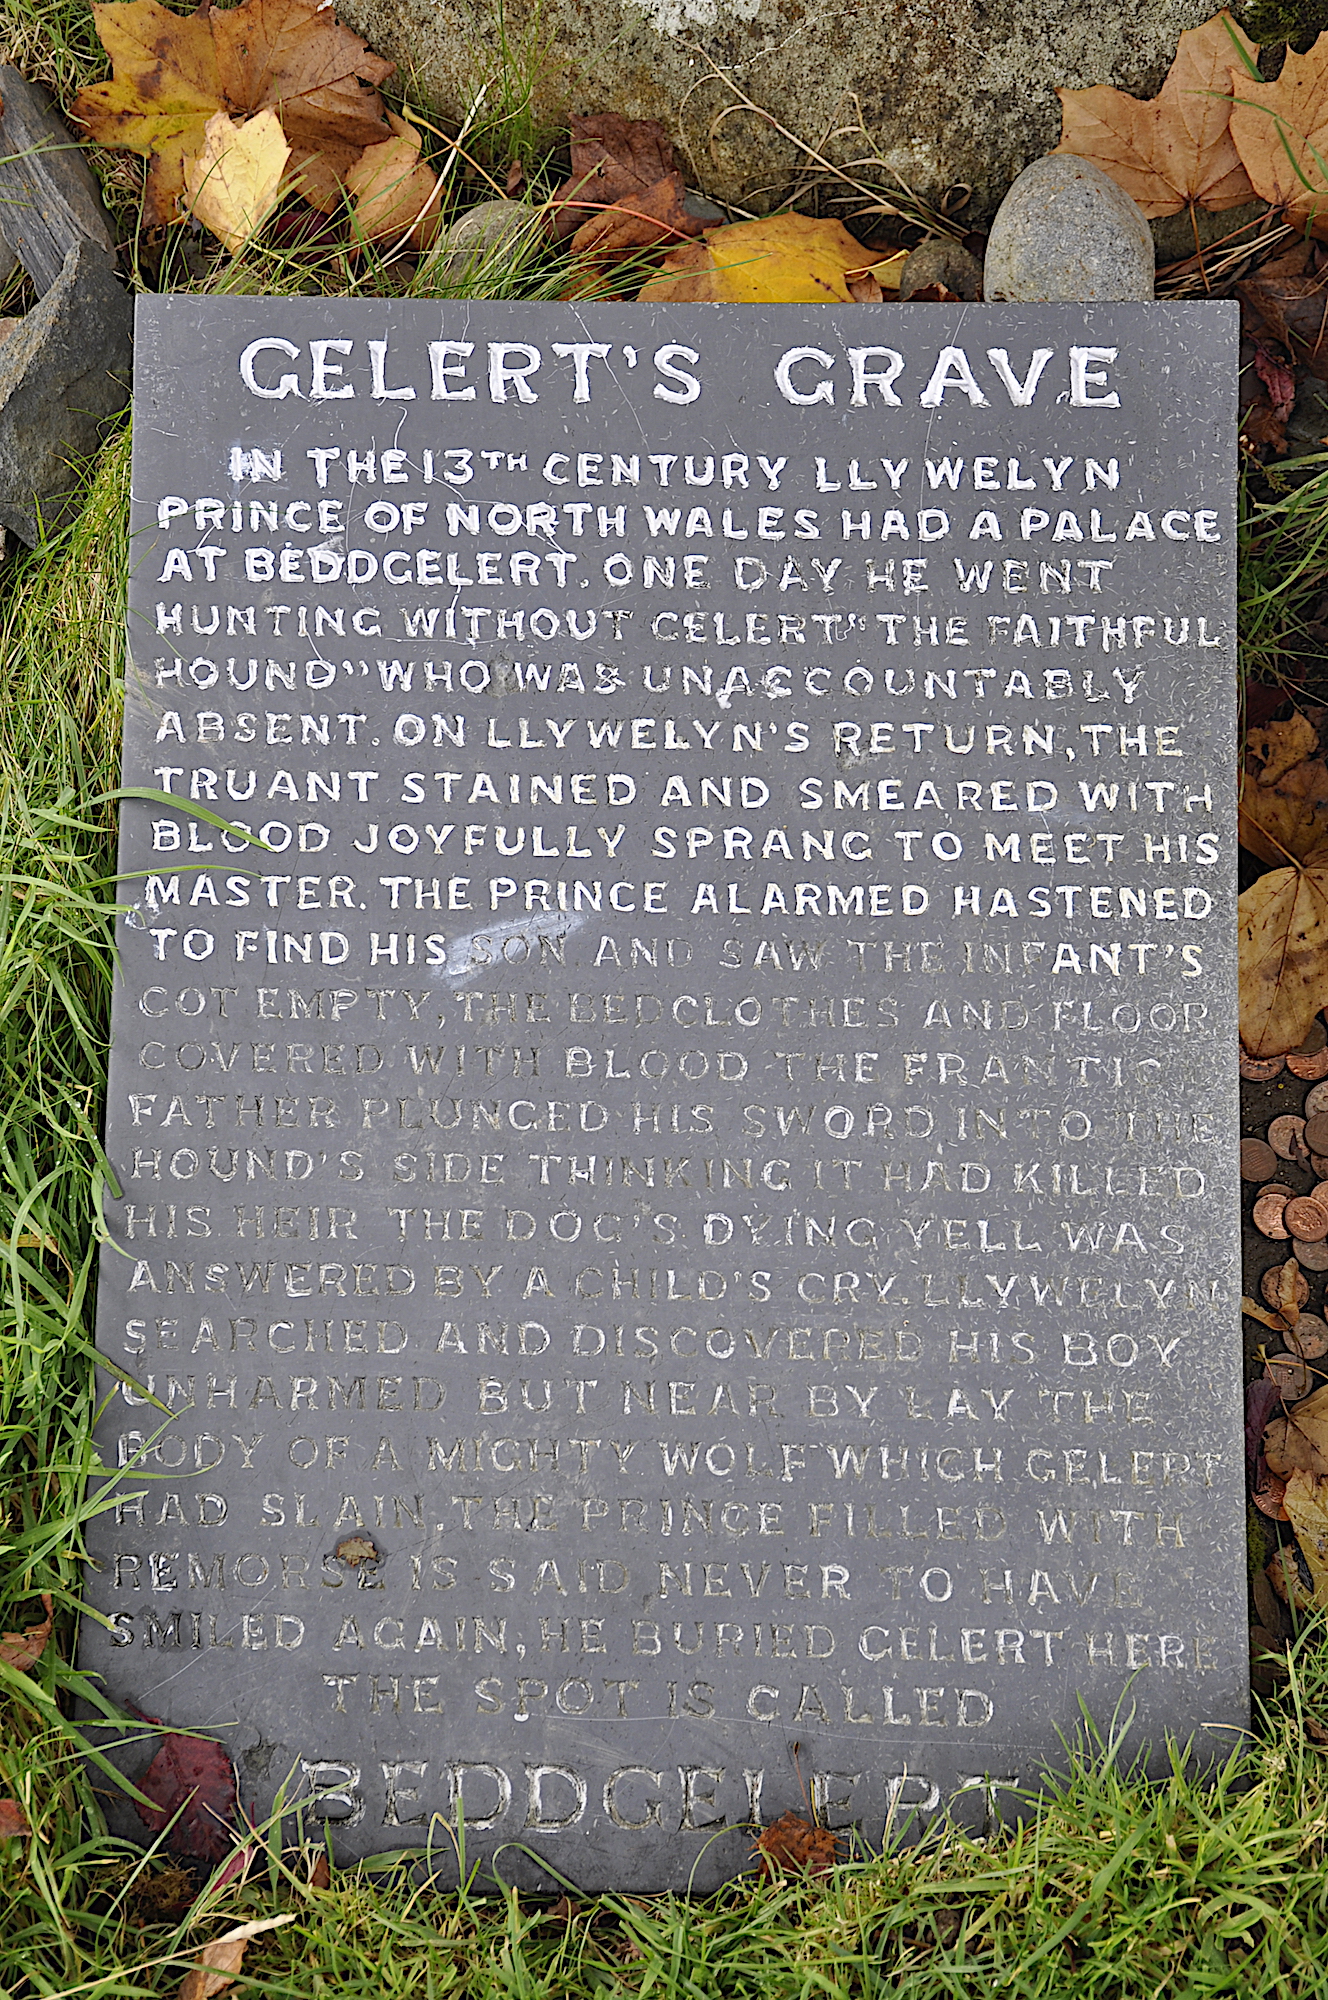 Gelert's Grave has helped to define Beddgelert as an important town in the world of Welsh folklore.